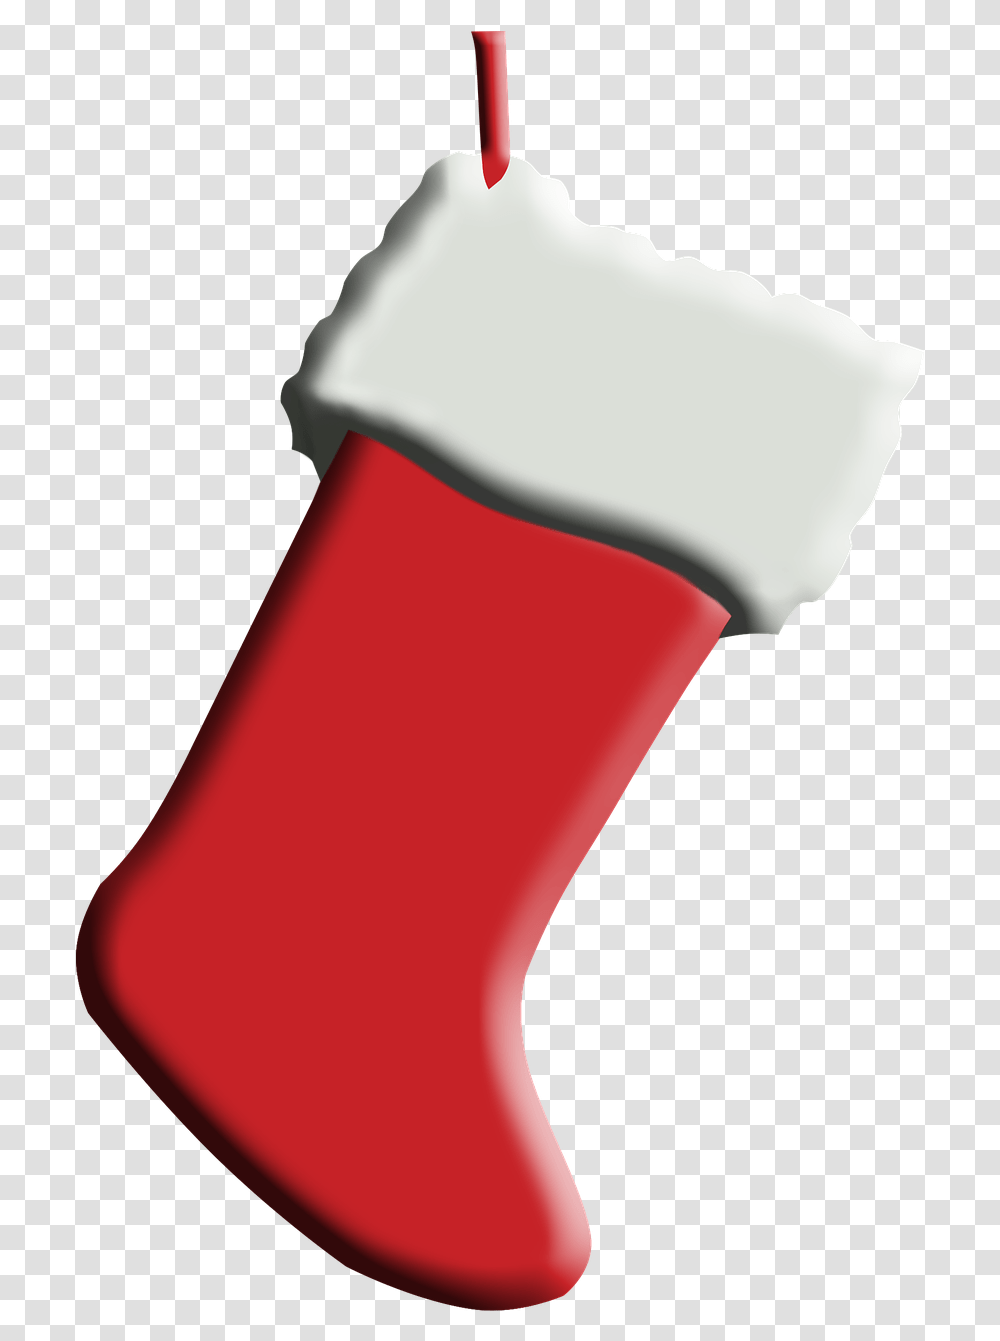 Christmas Stocking Free Image On Pixabay Clip Art, Gift Transparent Png